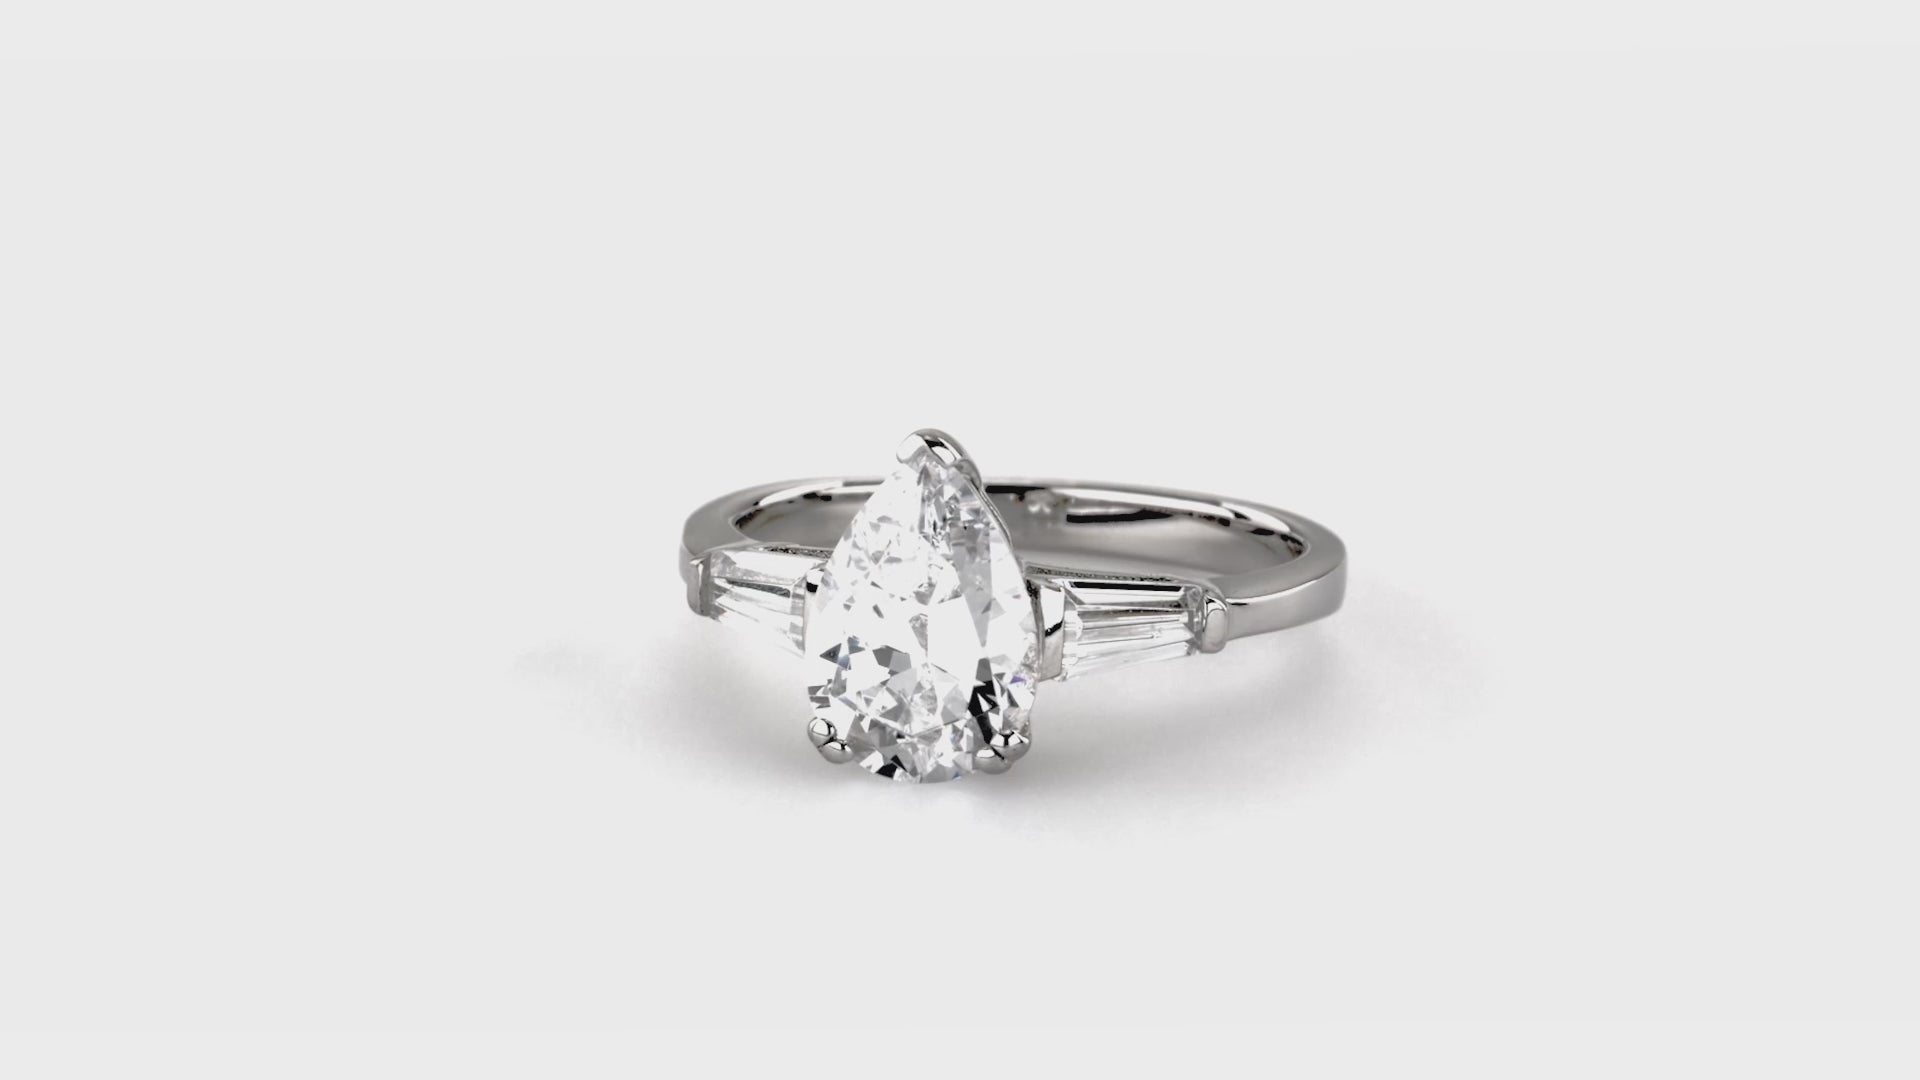 Video Contains 7-Stone Solitaire CZ Ring Set in Sterling Silver. Style Number VR626-02